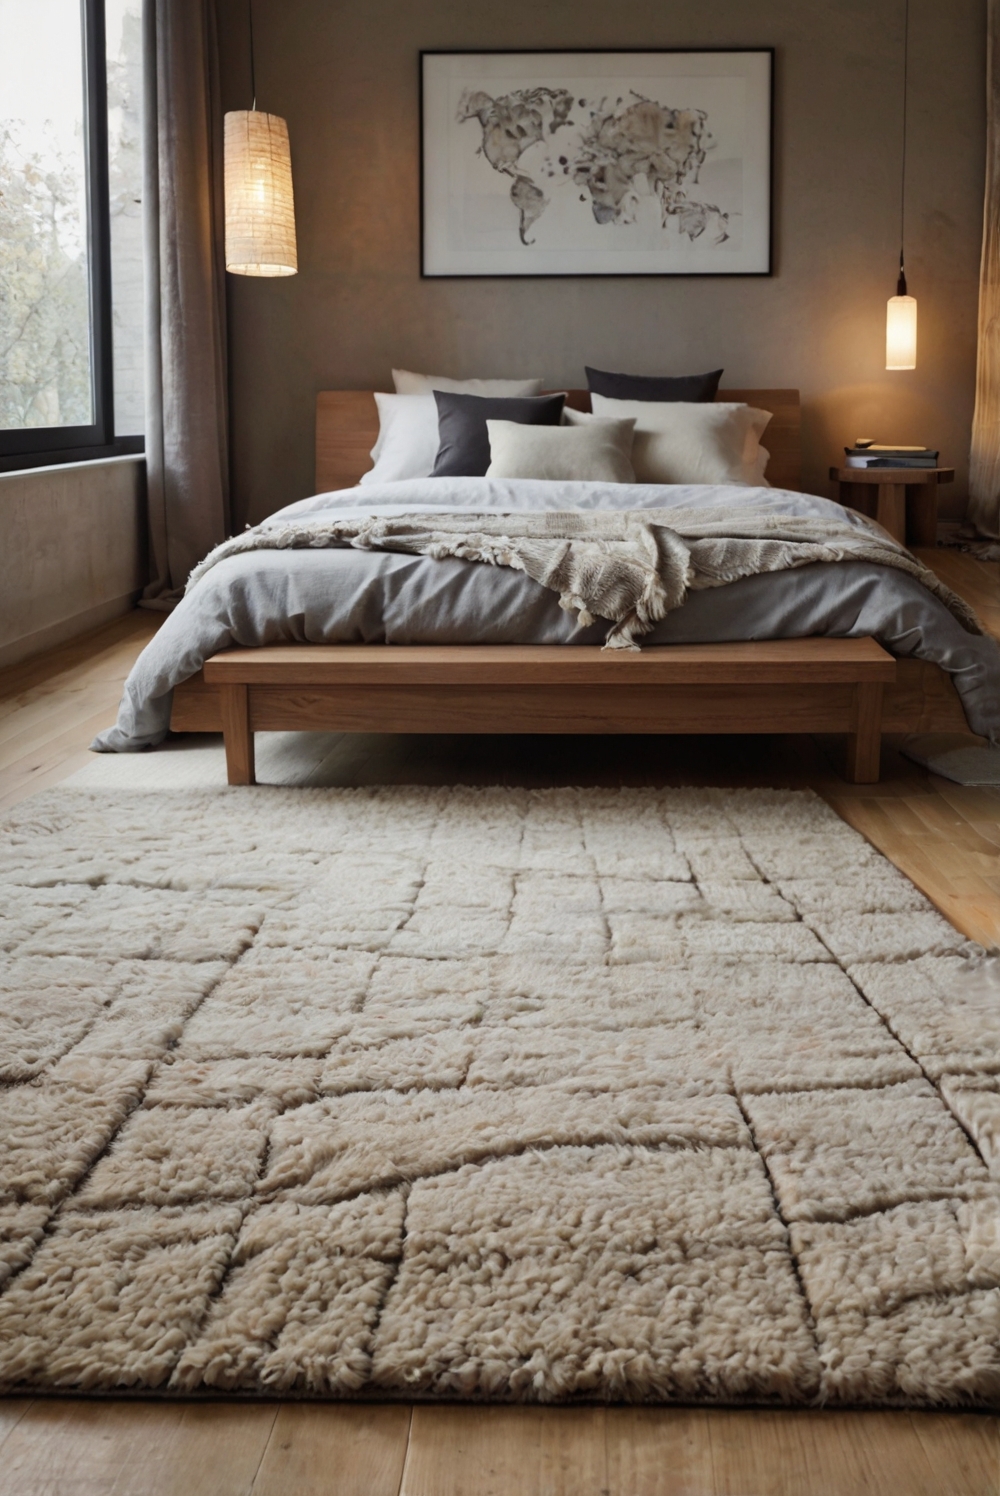 Why should you consider adding an area rug under your bed?